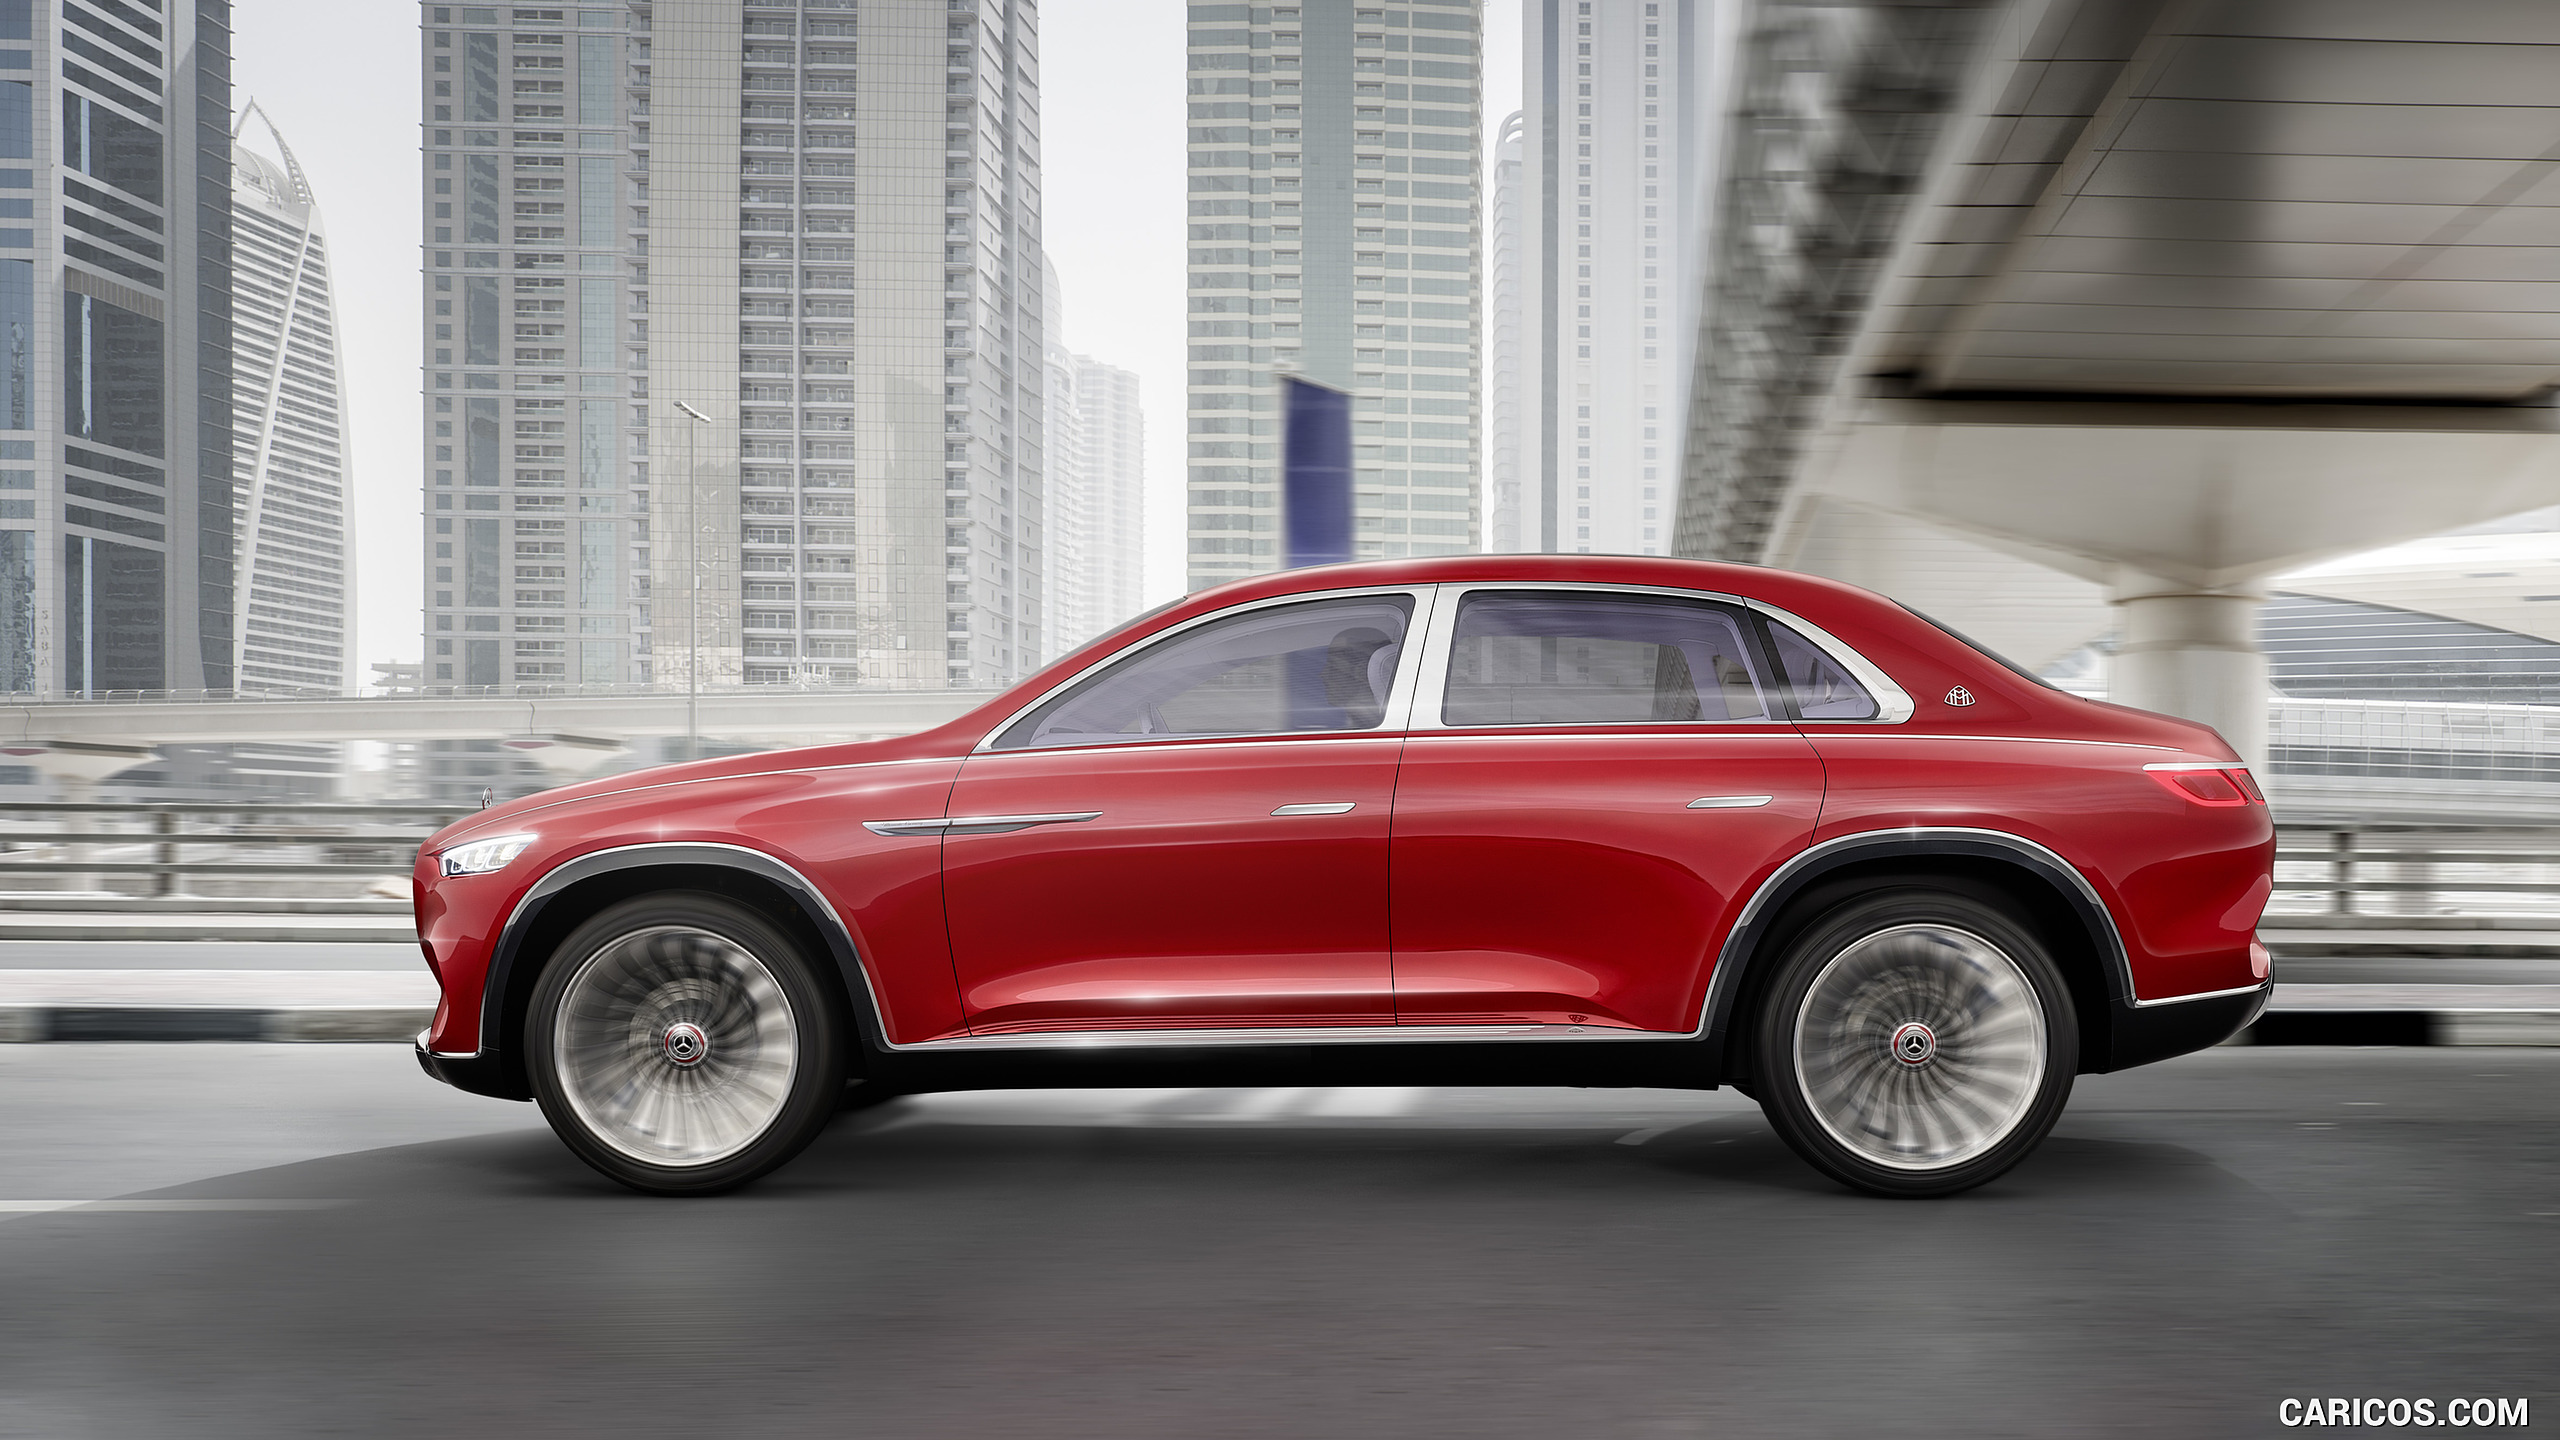 2018 Mercedes-Maybach Vision Ultimate Luxury SUV Concept - Side, #2 of 41